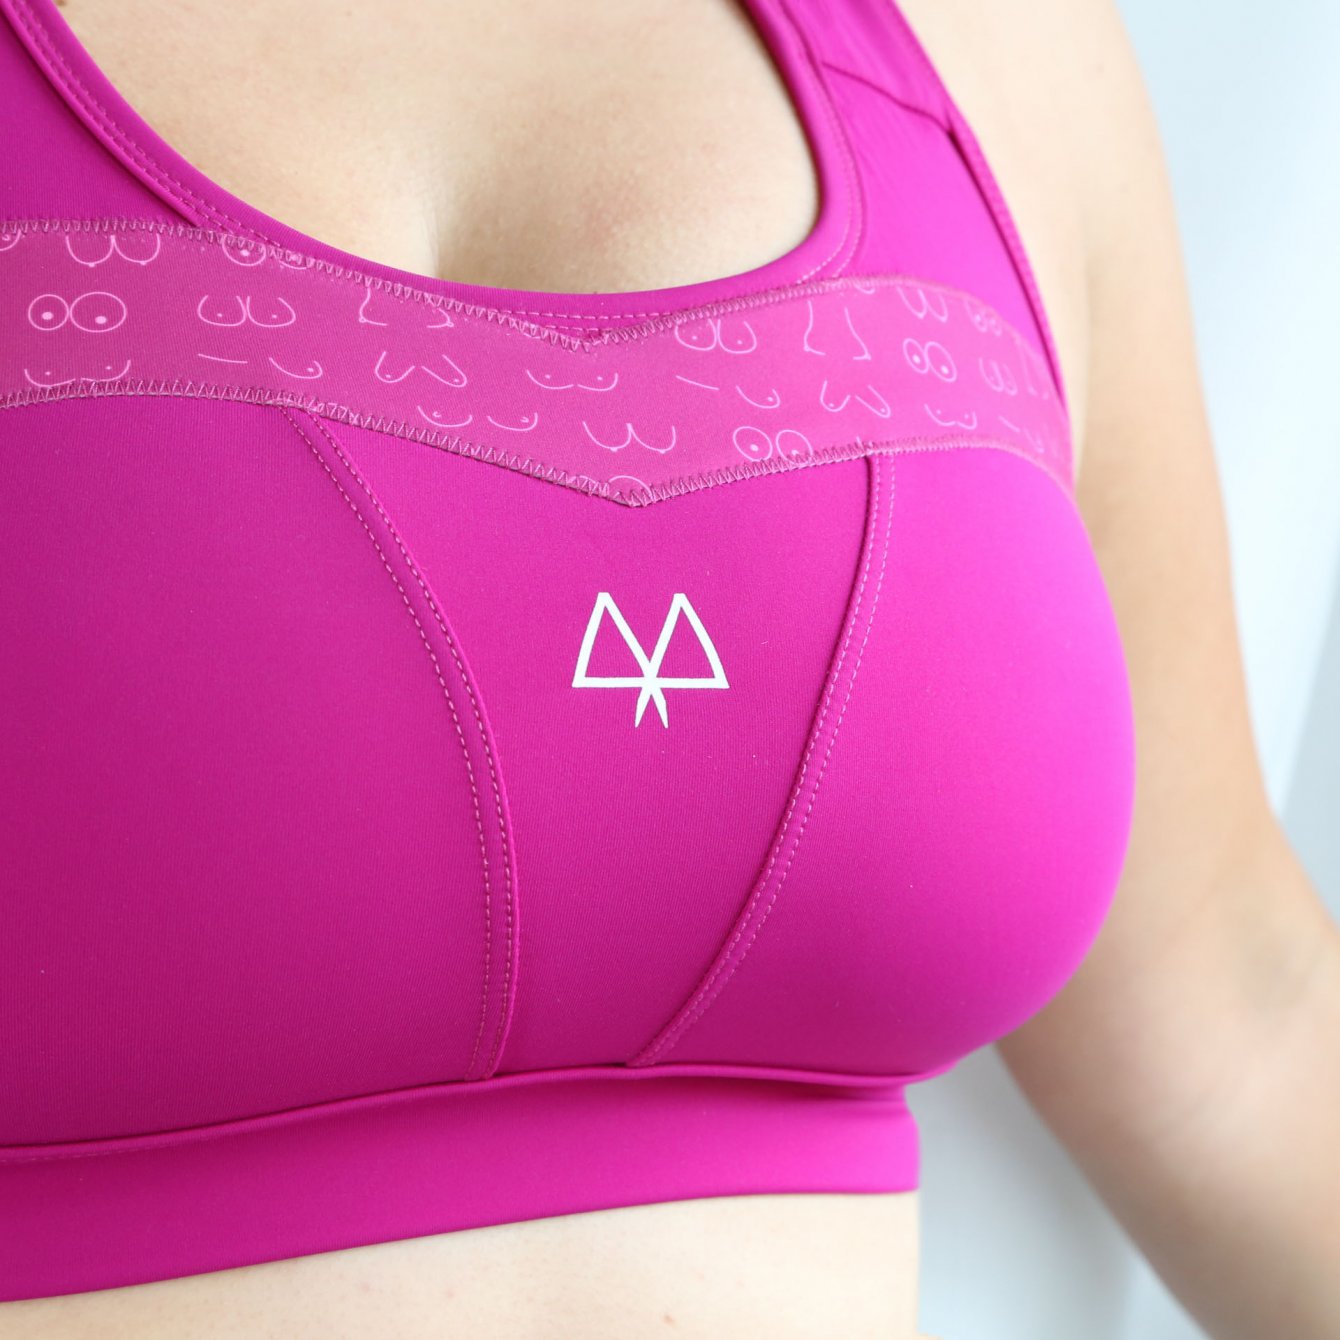 New Client – Maaree – launch limited edition empower sports bra